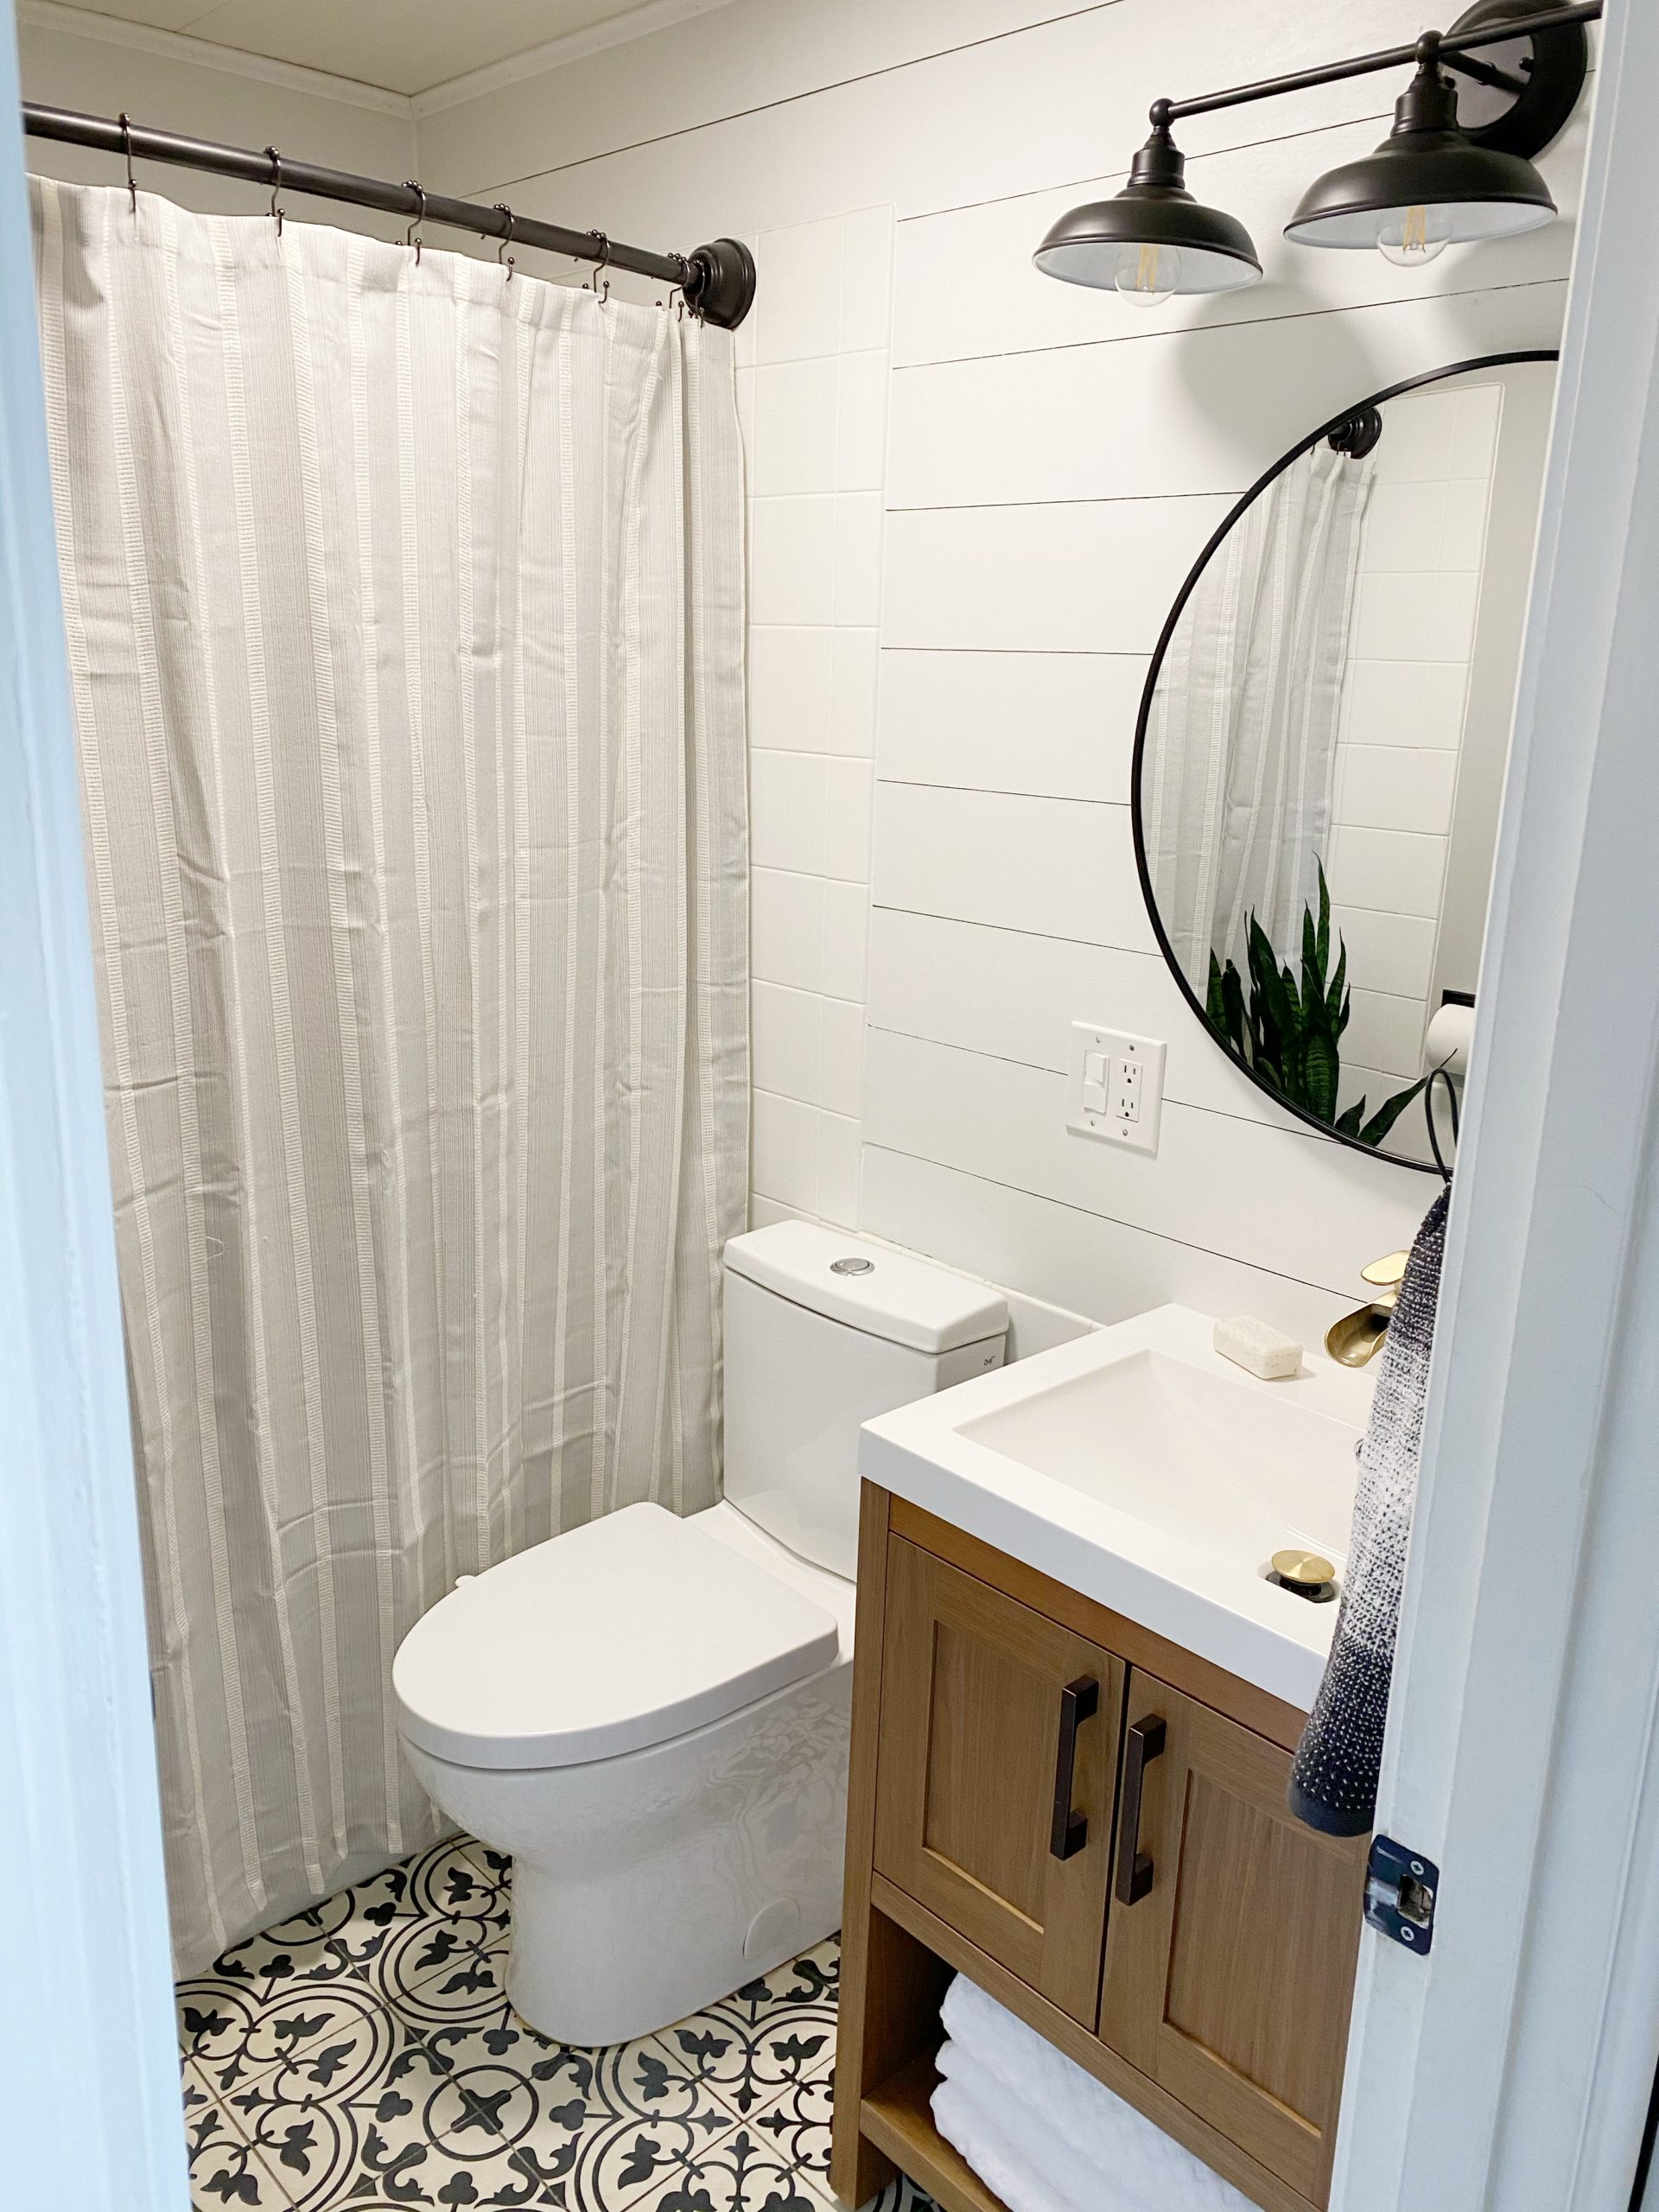 Bathroom Refresh on a Budget - Dreaming of Homemaking